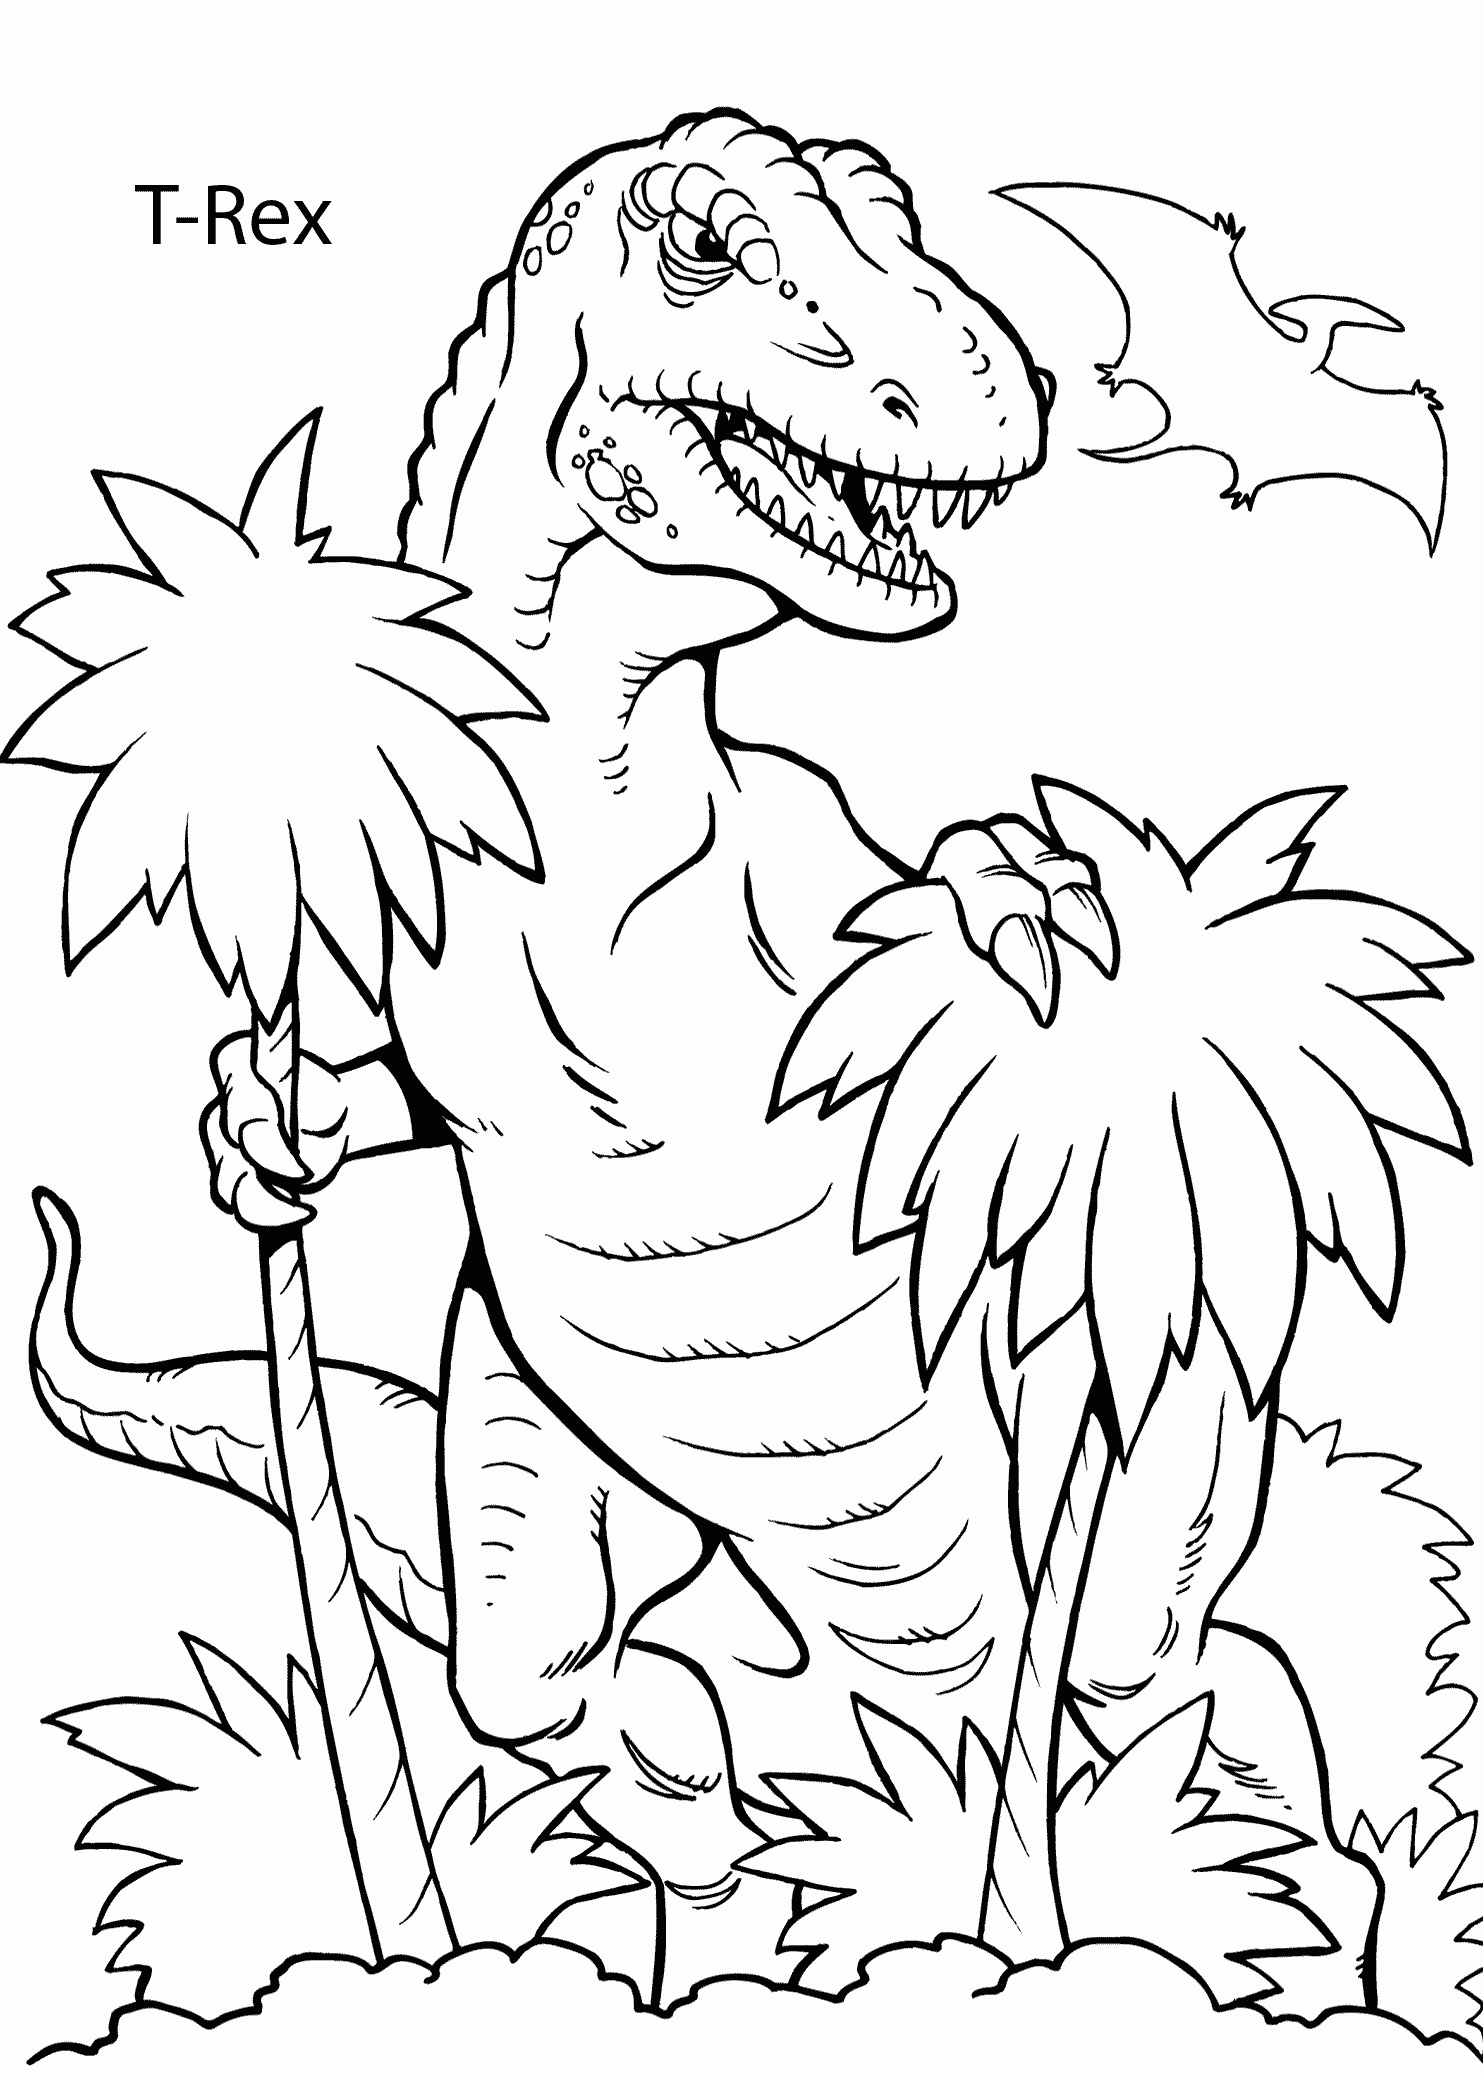 T-Rex Dinosaur Coloring Pages For Kids, Printable Free - Free Printable Dinosaur Coloring Pages